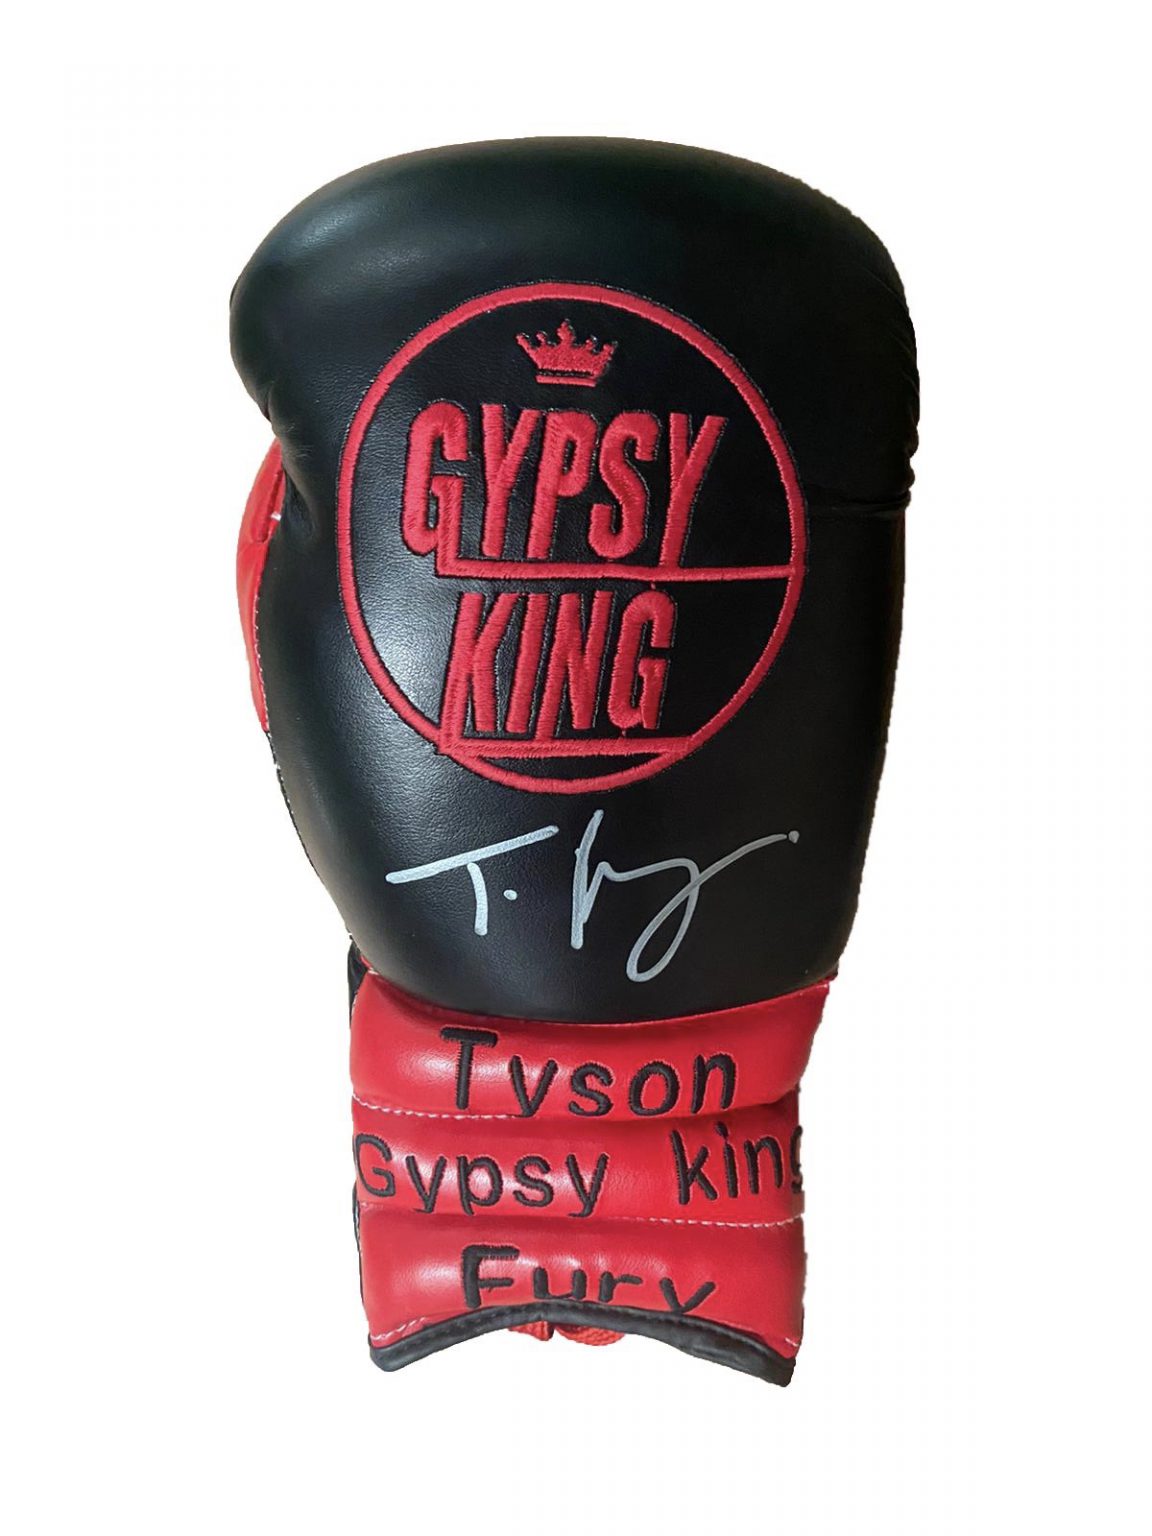 Black & Red Signed Boxing Glove In A Display Case - Tyson Fury Official